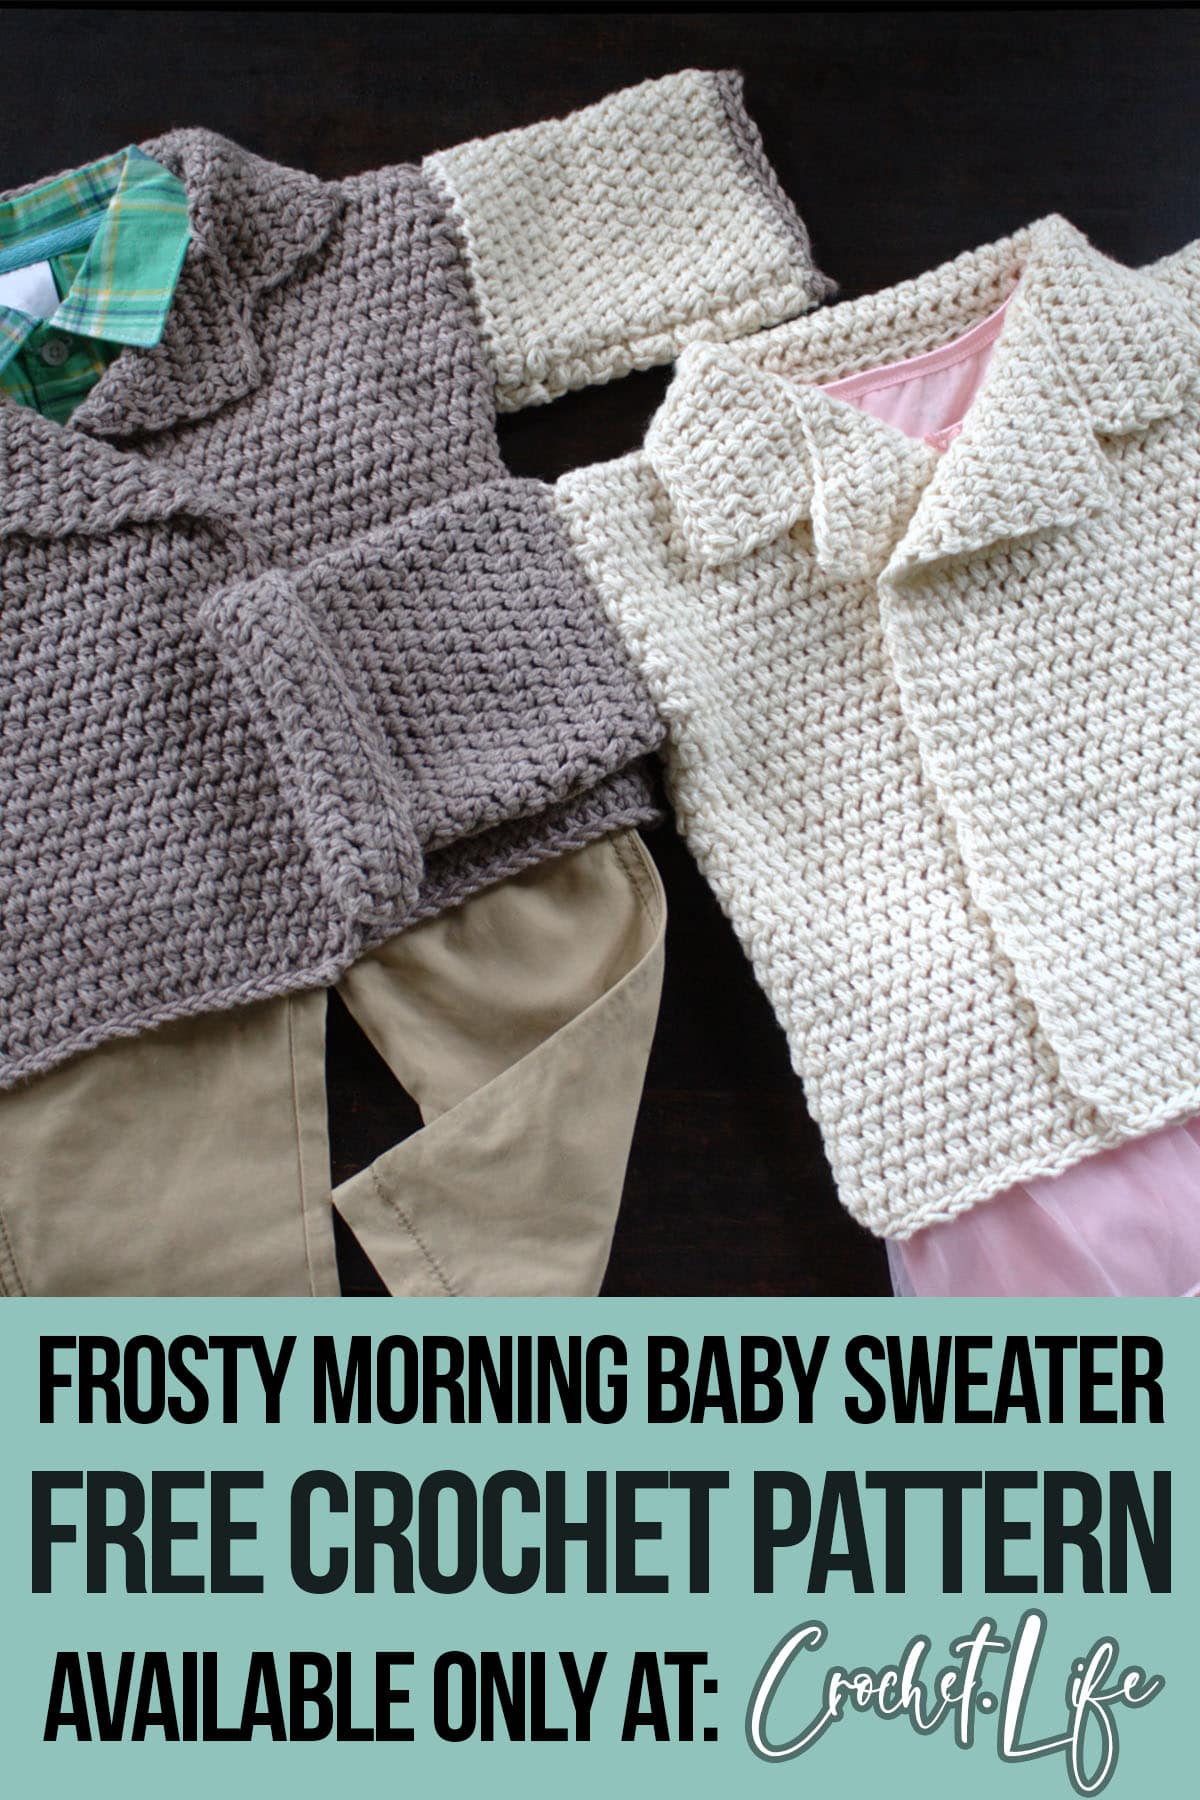 baby size crochet pattern sweater with text which reads frosty morning baby sweater free crochet pattern available only at crochet.life 